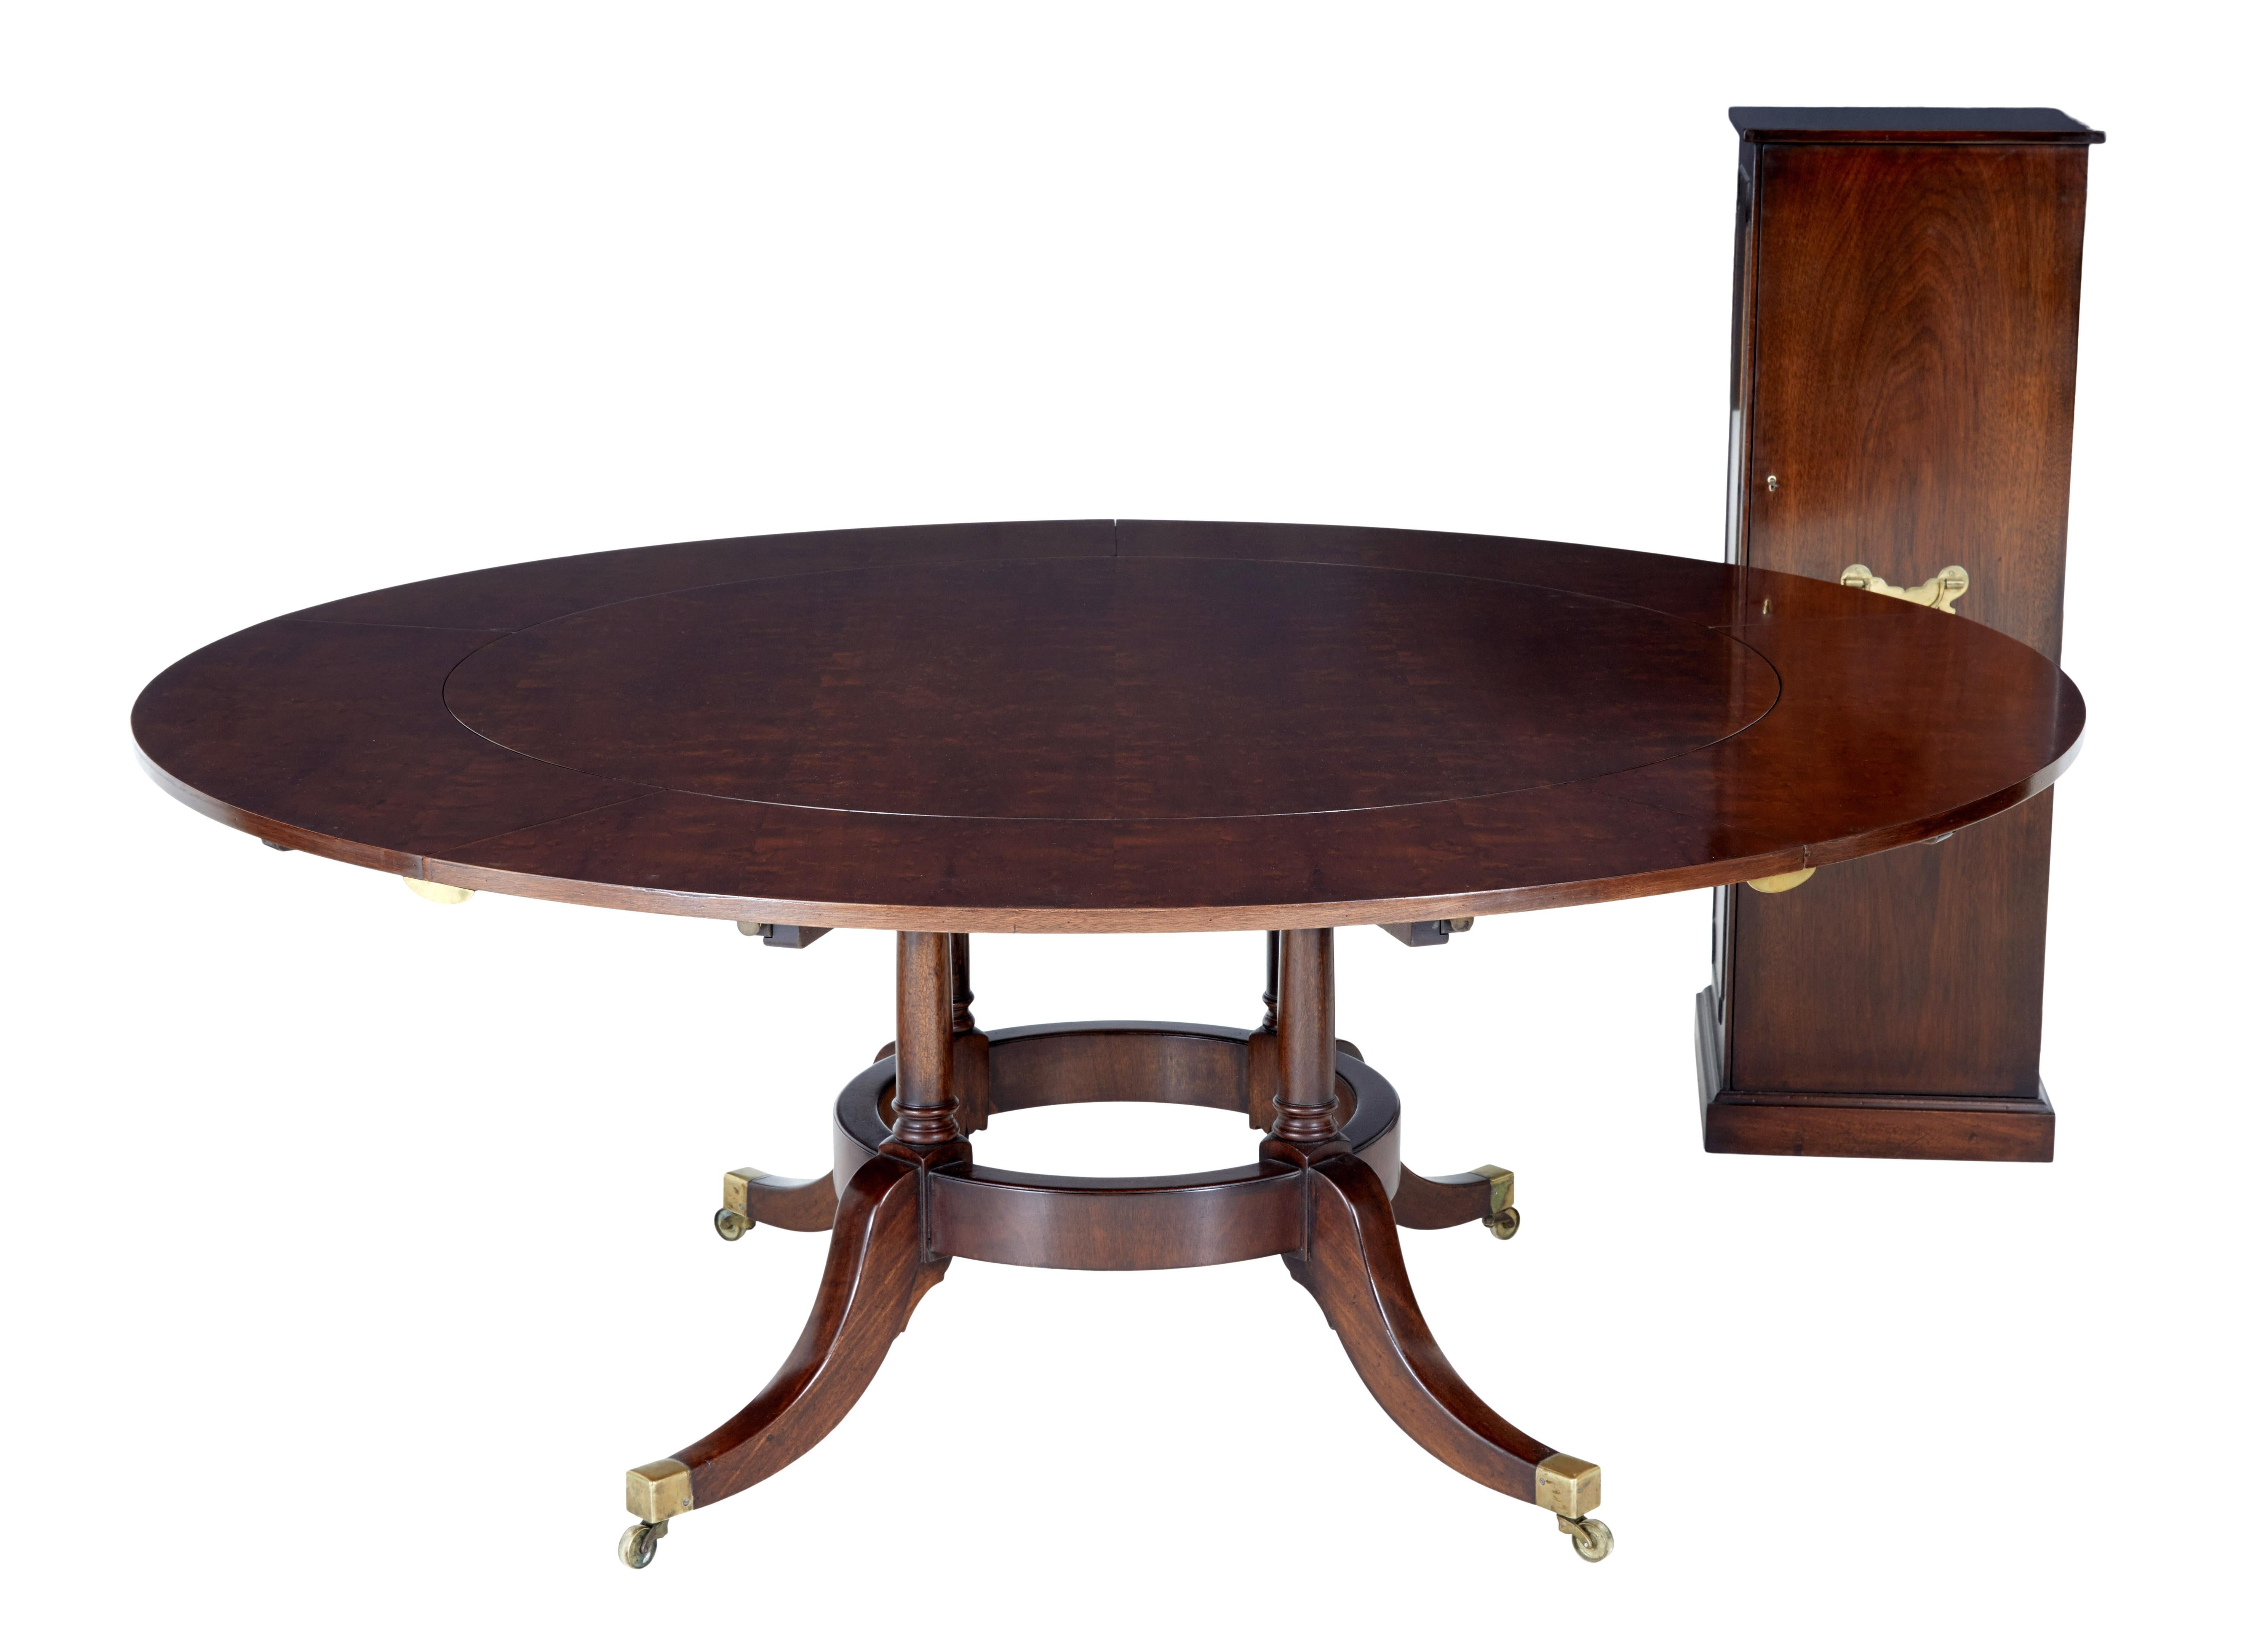 Late 20th century mahogany jupe dining table with leaf cabinet circa 1990.

Here we offer a beautiful jupe dining table made in mahogany. These tables allow themselves to be extended by adding to the diameter for increased seating.

Circular top